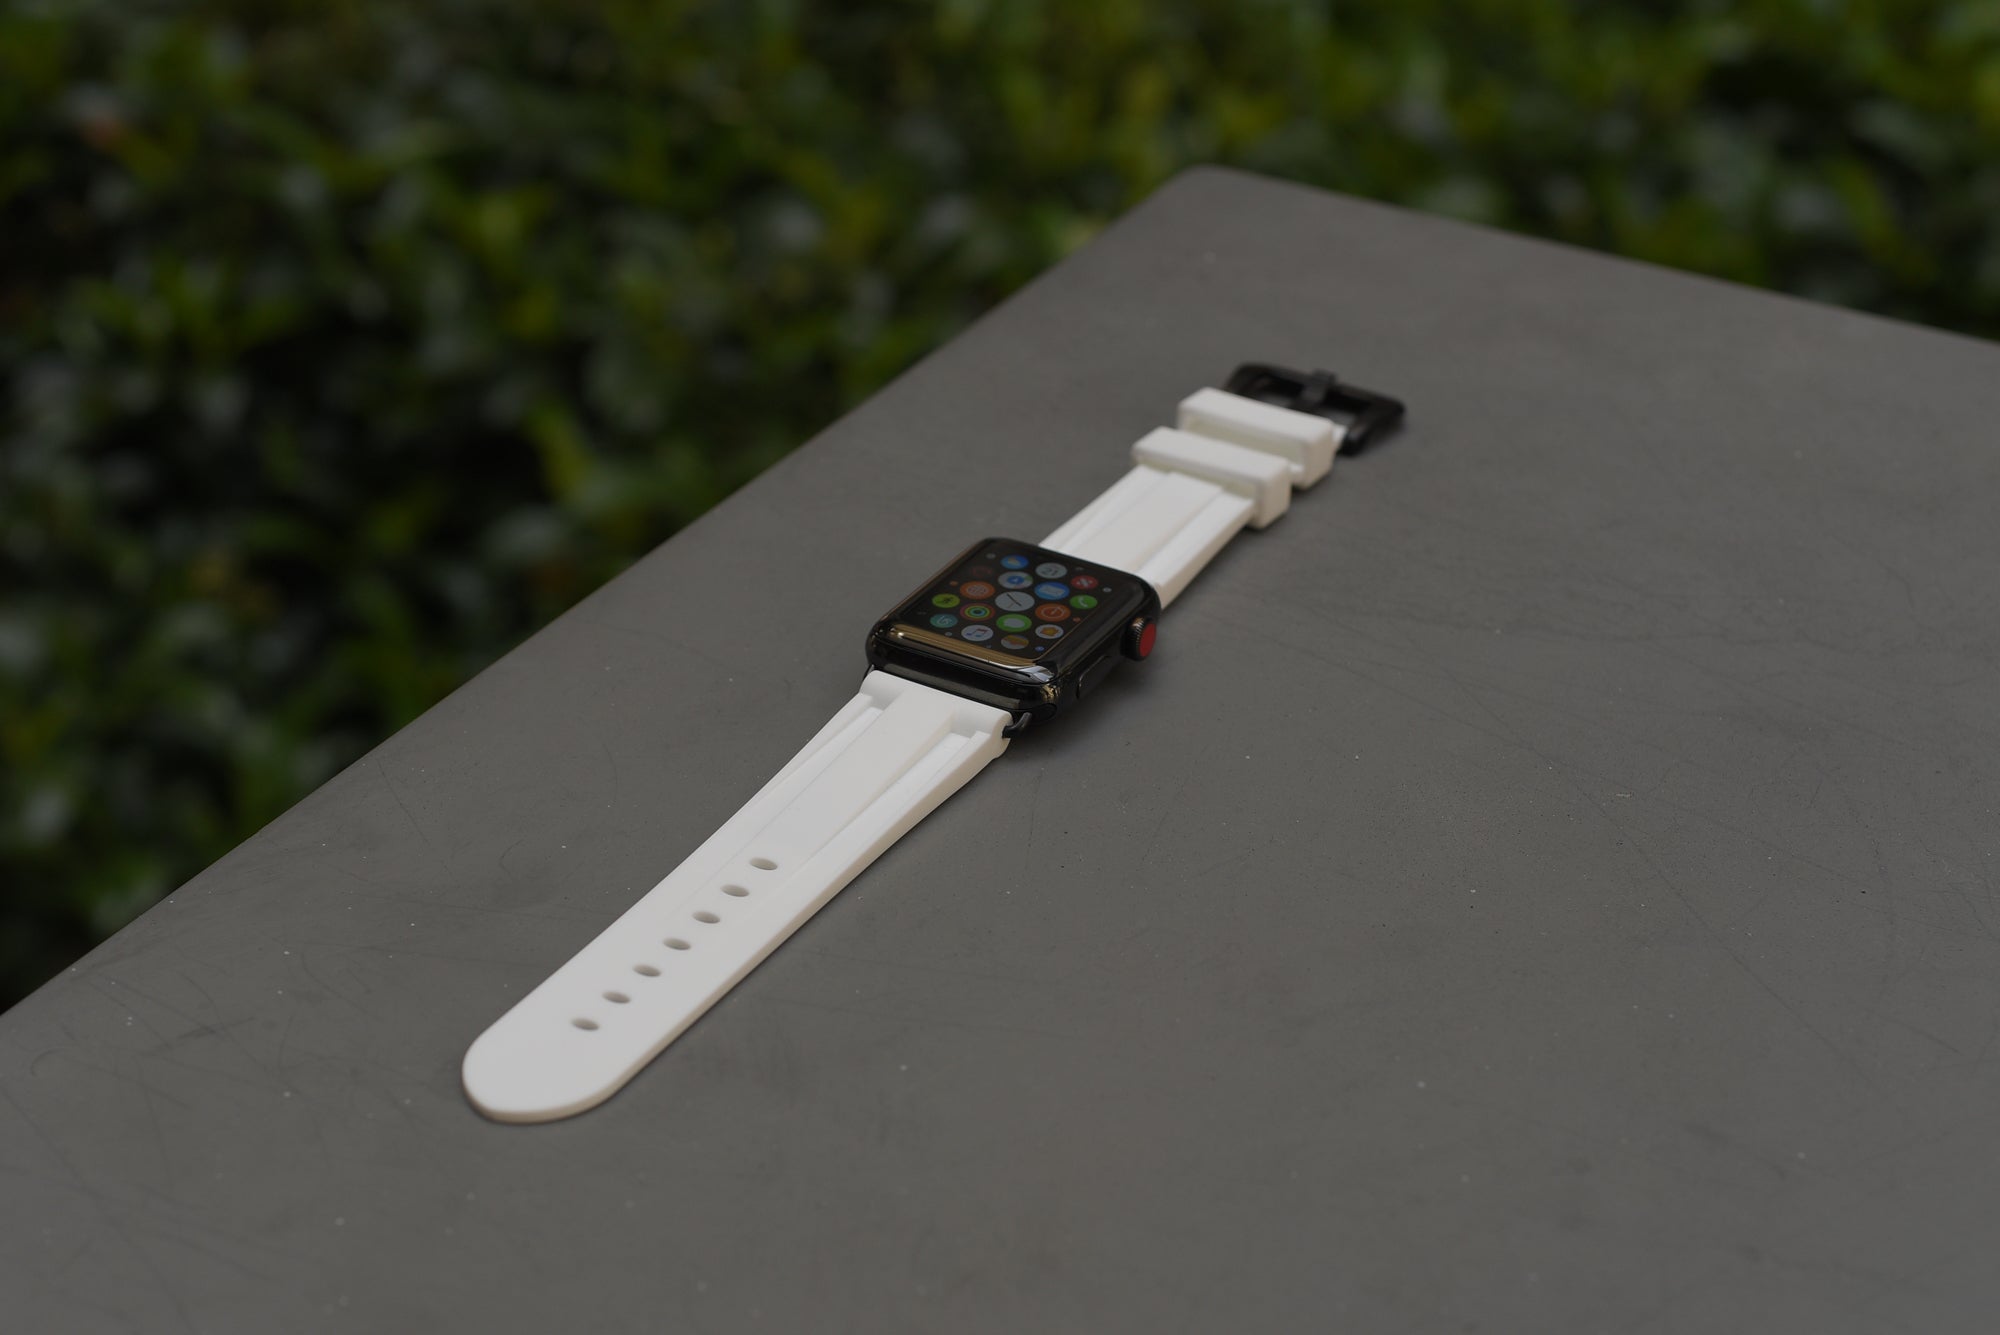 White Rubber Apple Watch Strap - Apple Watch Strap - Le Luxe Straps